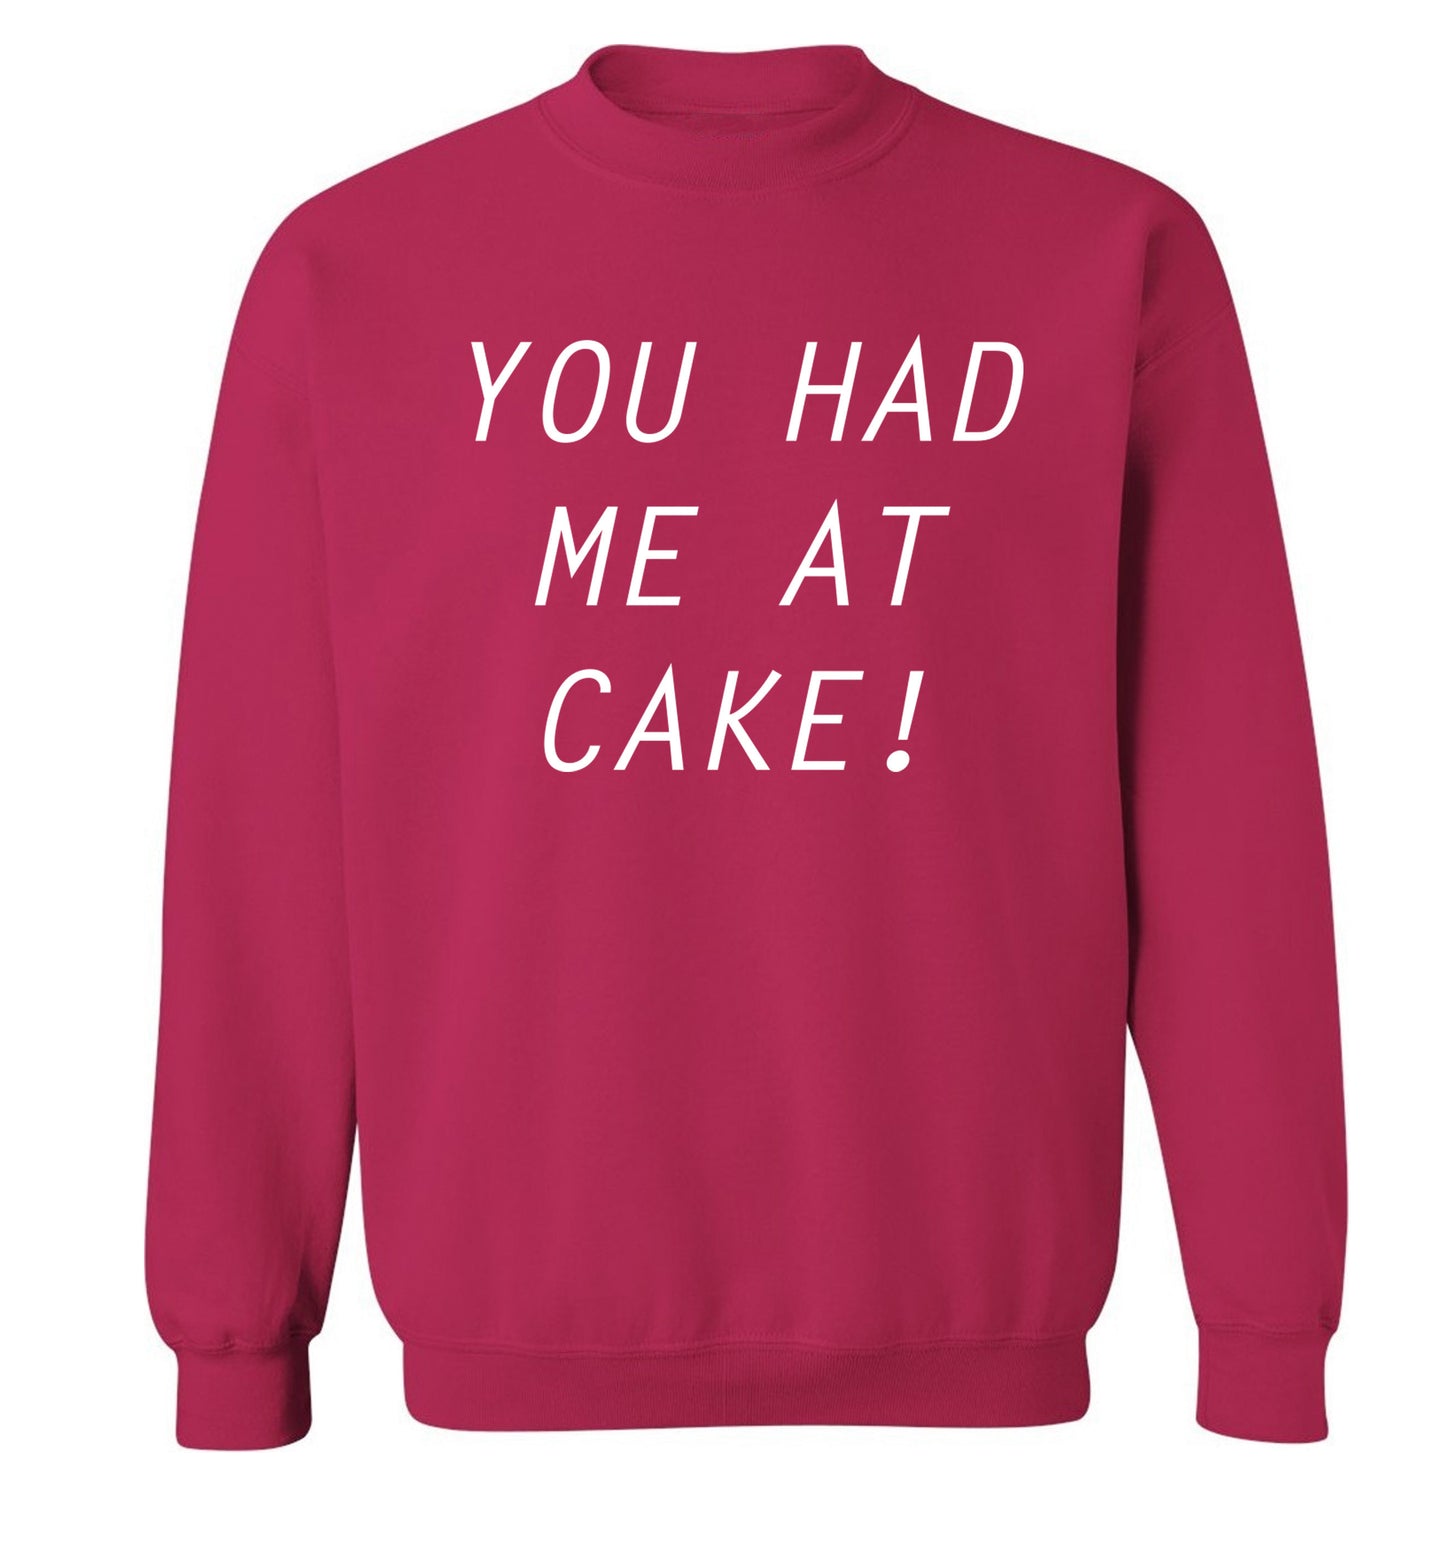 You had me at cake Adult's unisex pink Sweater 2XL